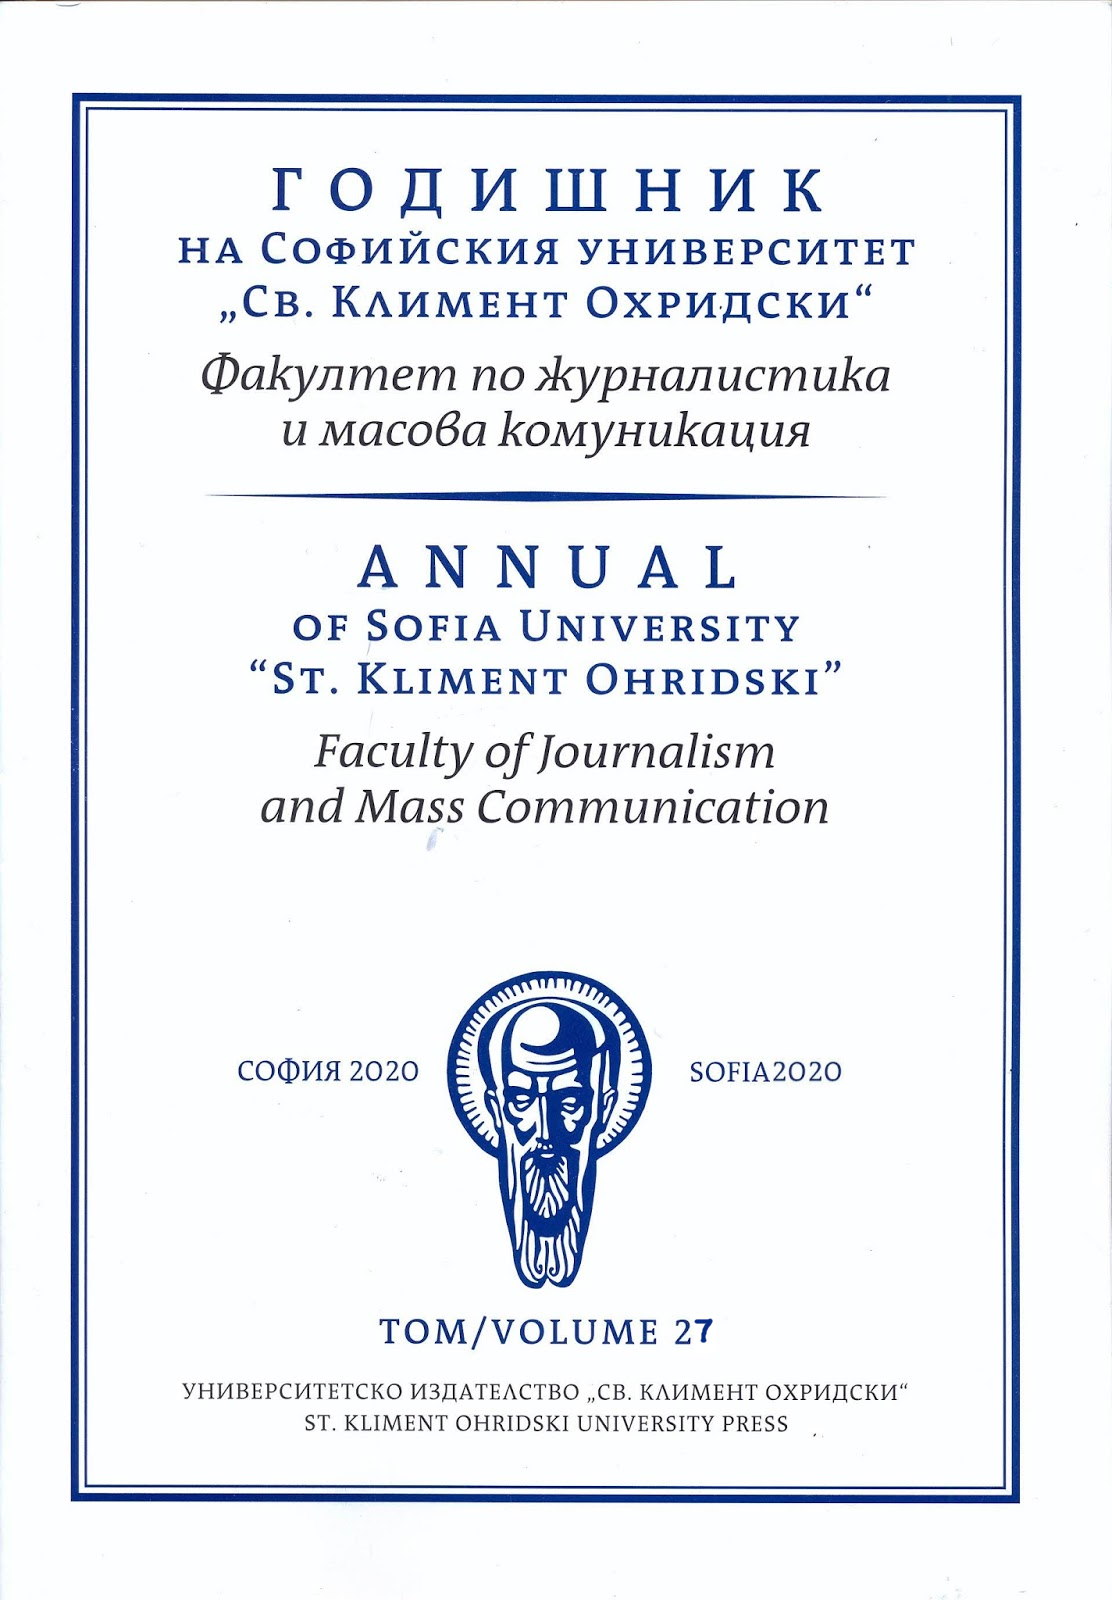 					View Vol. 27 No. 1 (2020): Annual of Sofia University "St. Kliment Ohridski" - Faculty of Journalism and Mass Communication
				